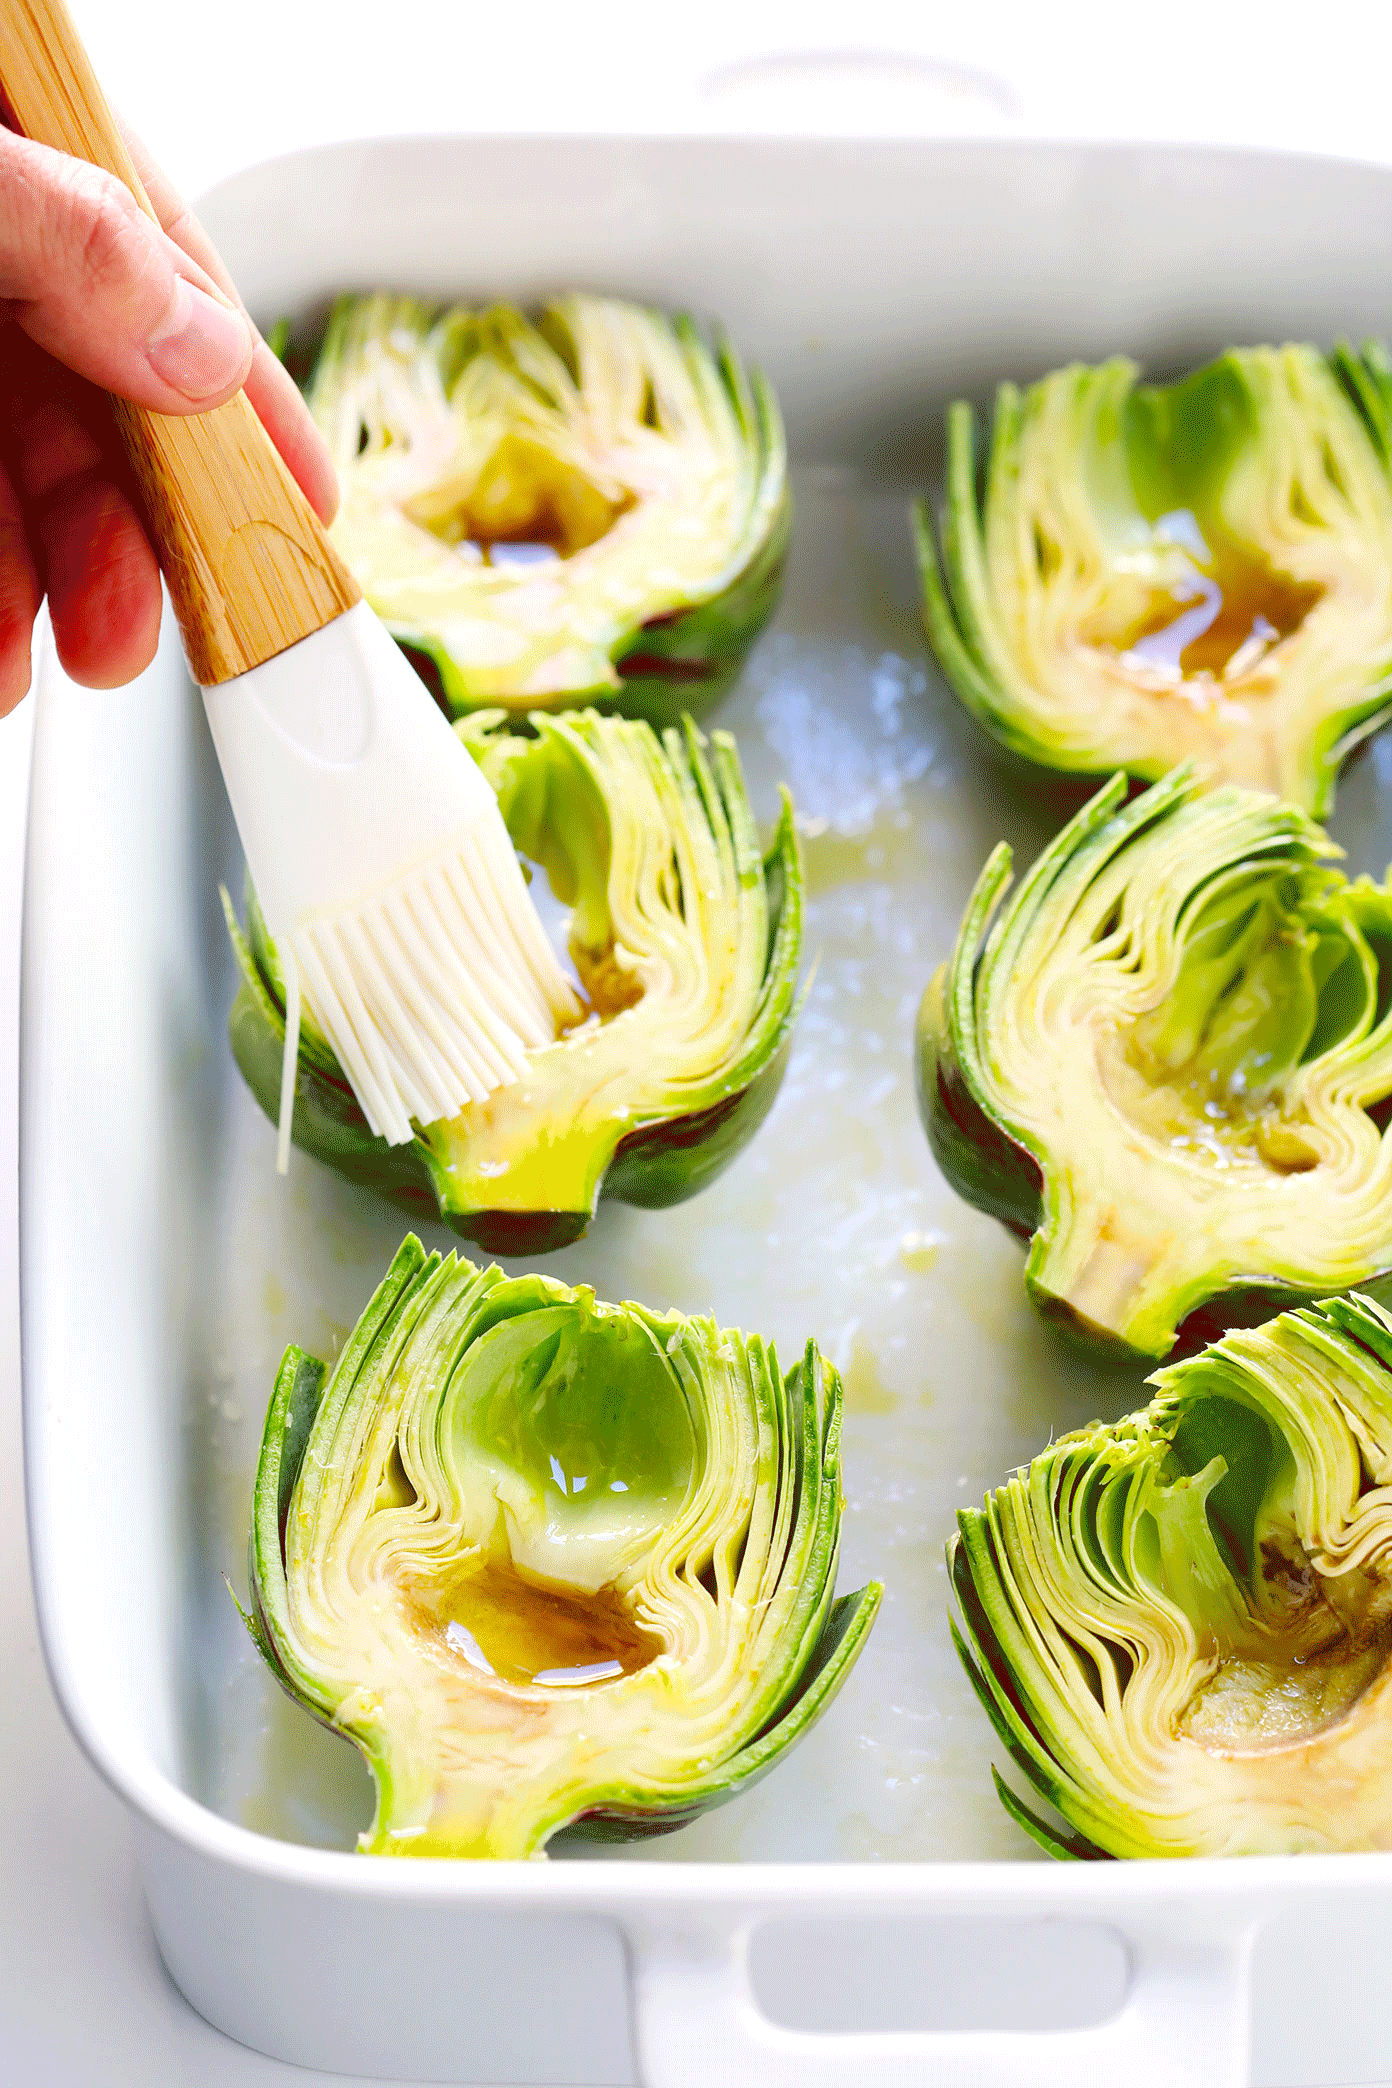 How To Make Roasted Artichokes